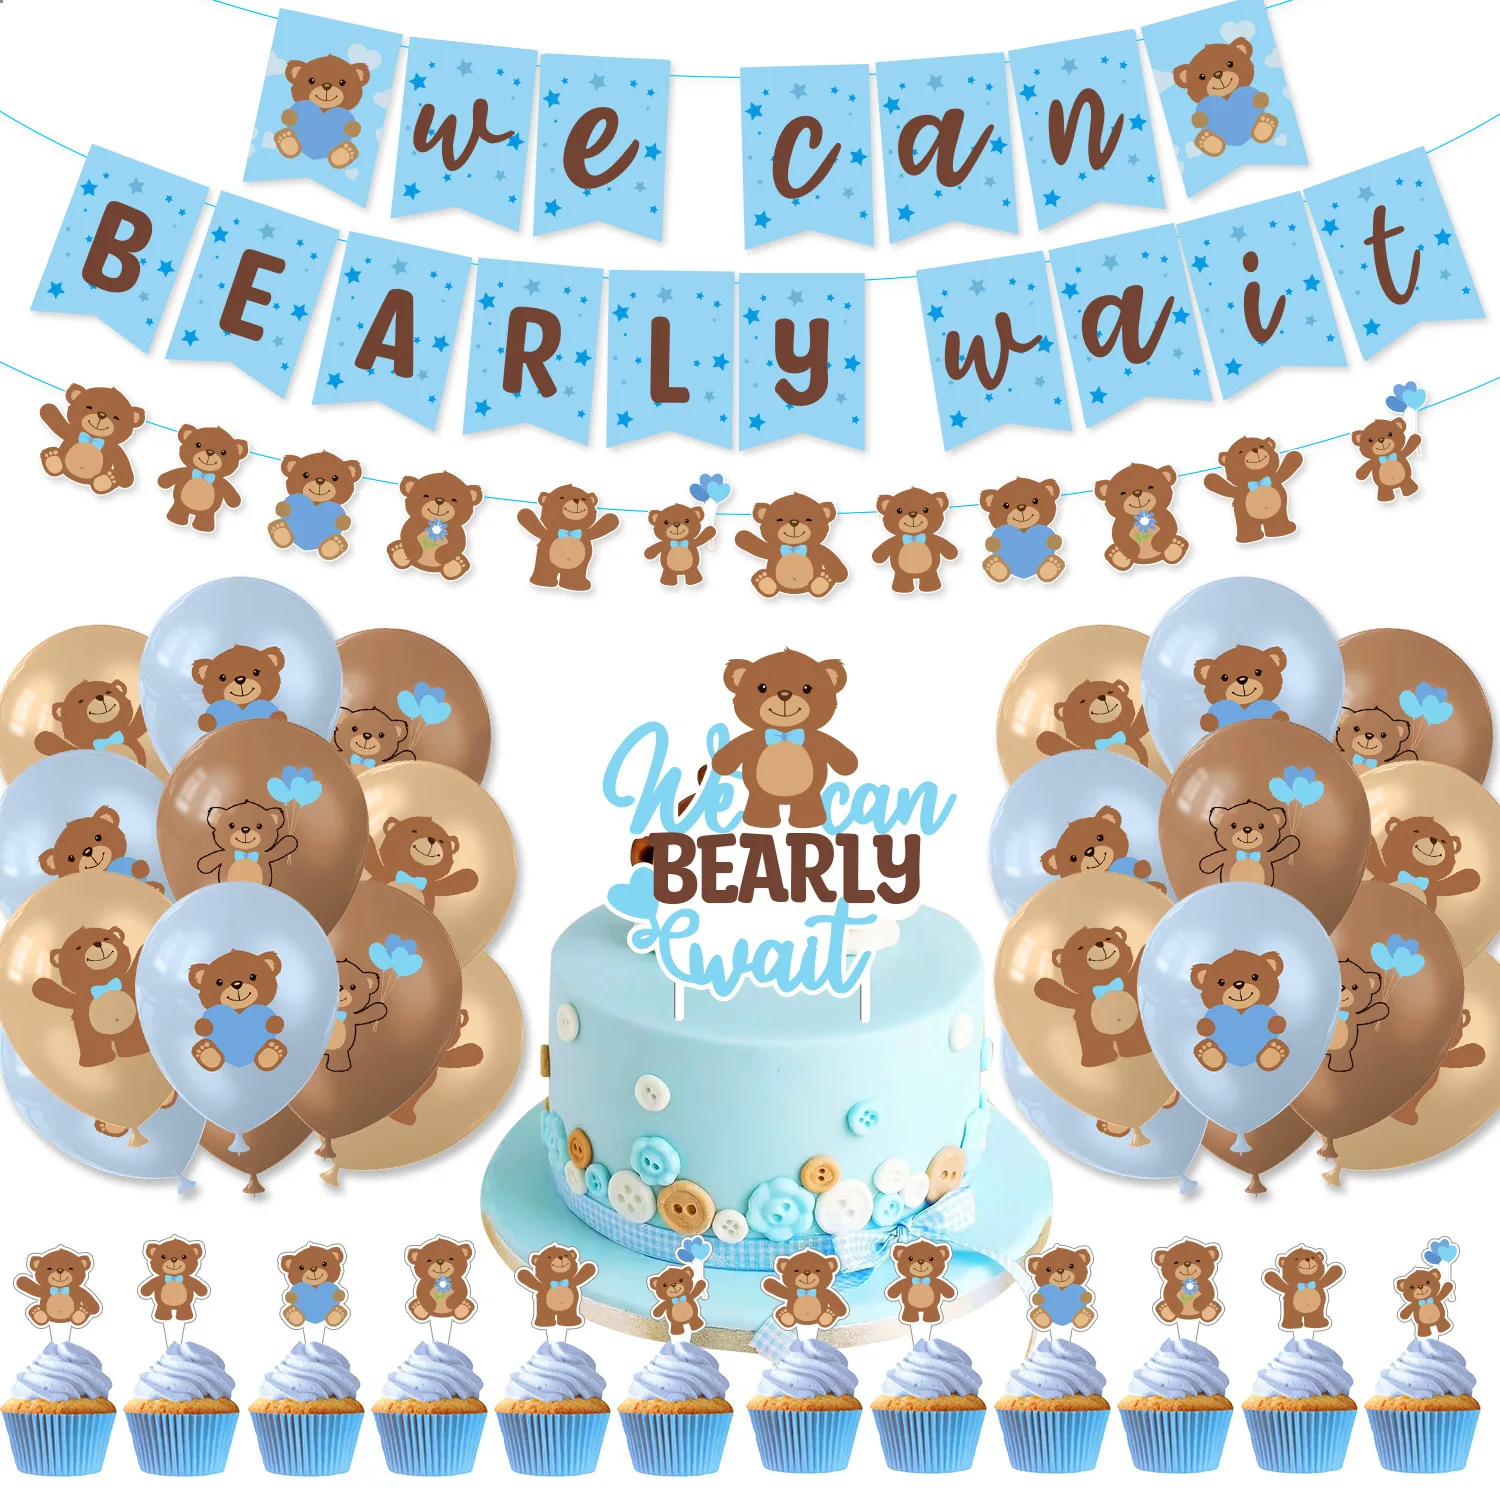 

Disney Teddy Bear Theme Birthday Party Decoration Balloons Set Banner Cake Topper Balloon Baby Shower Party Event Layout Supplie